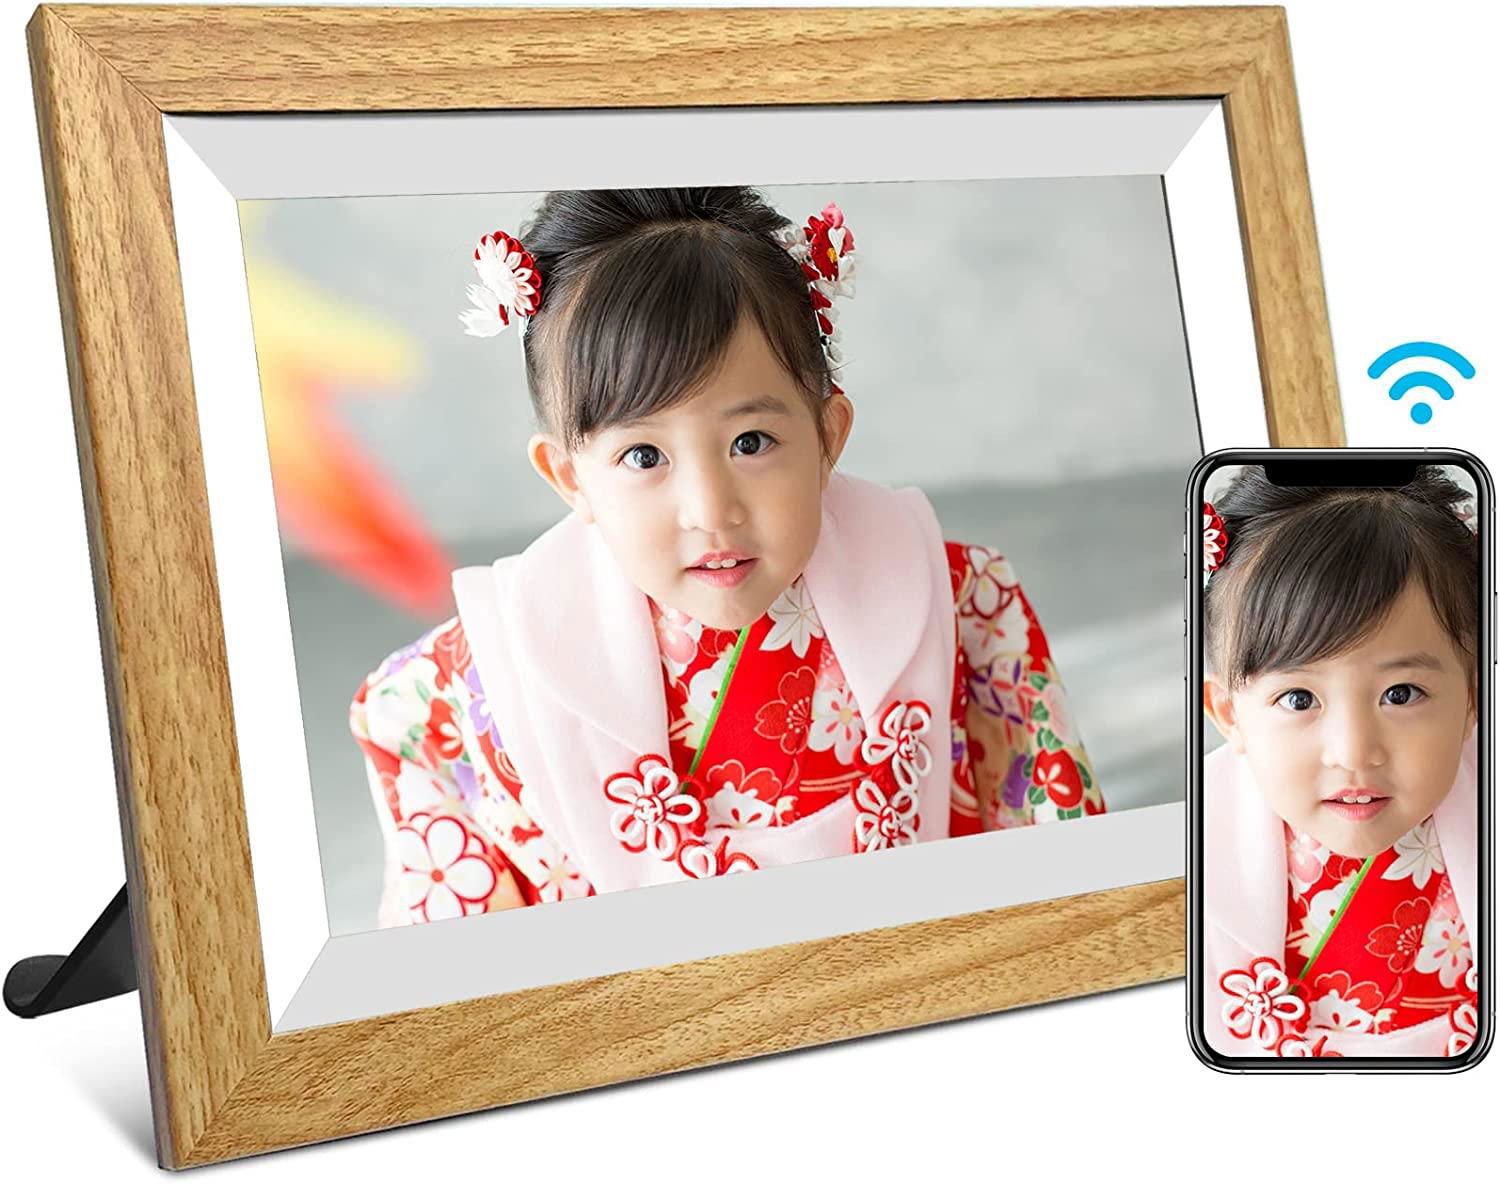  10 inch Touch Screen HD Display Wooden Picture Frame Wedding Gifts Share Photo 